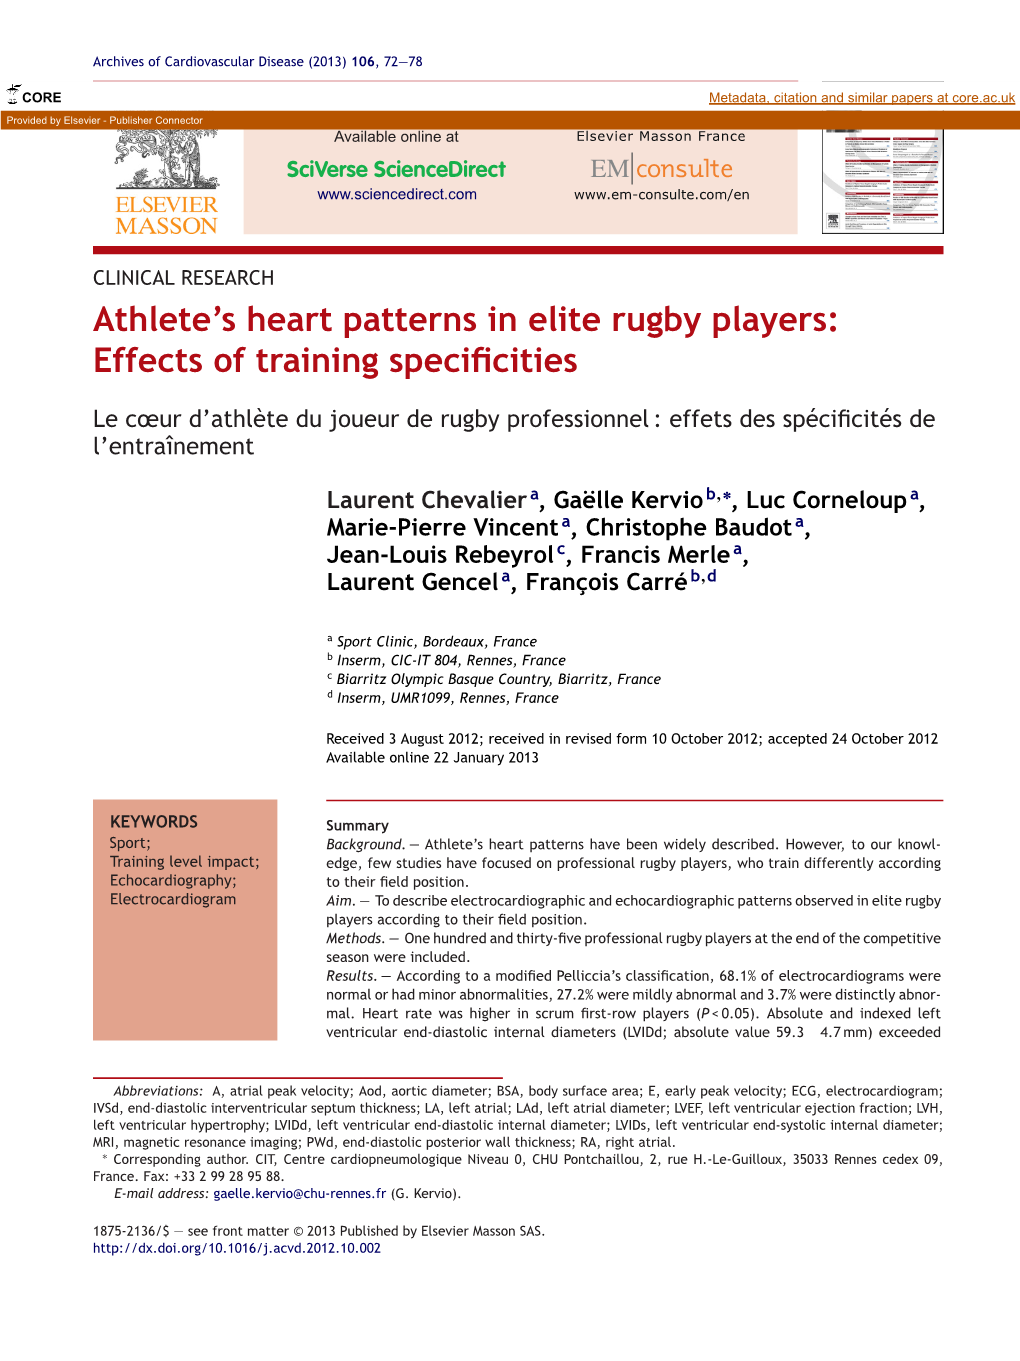 Athlete's Heart Patterns in Elite Rugby Players